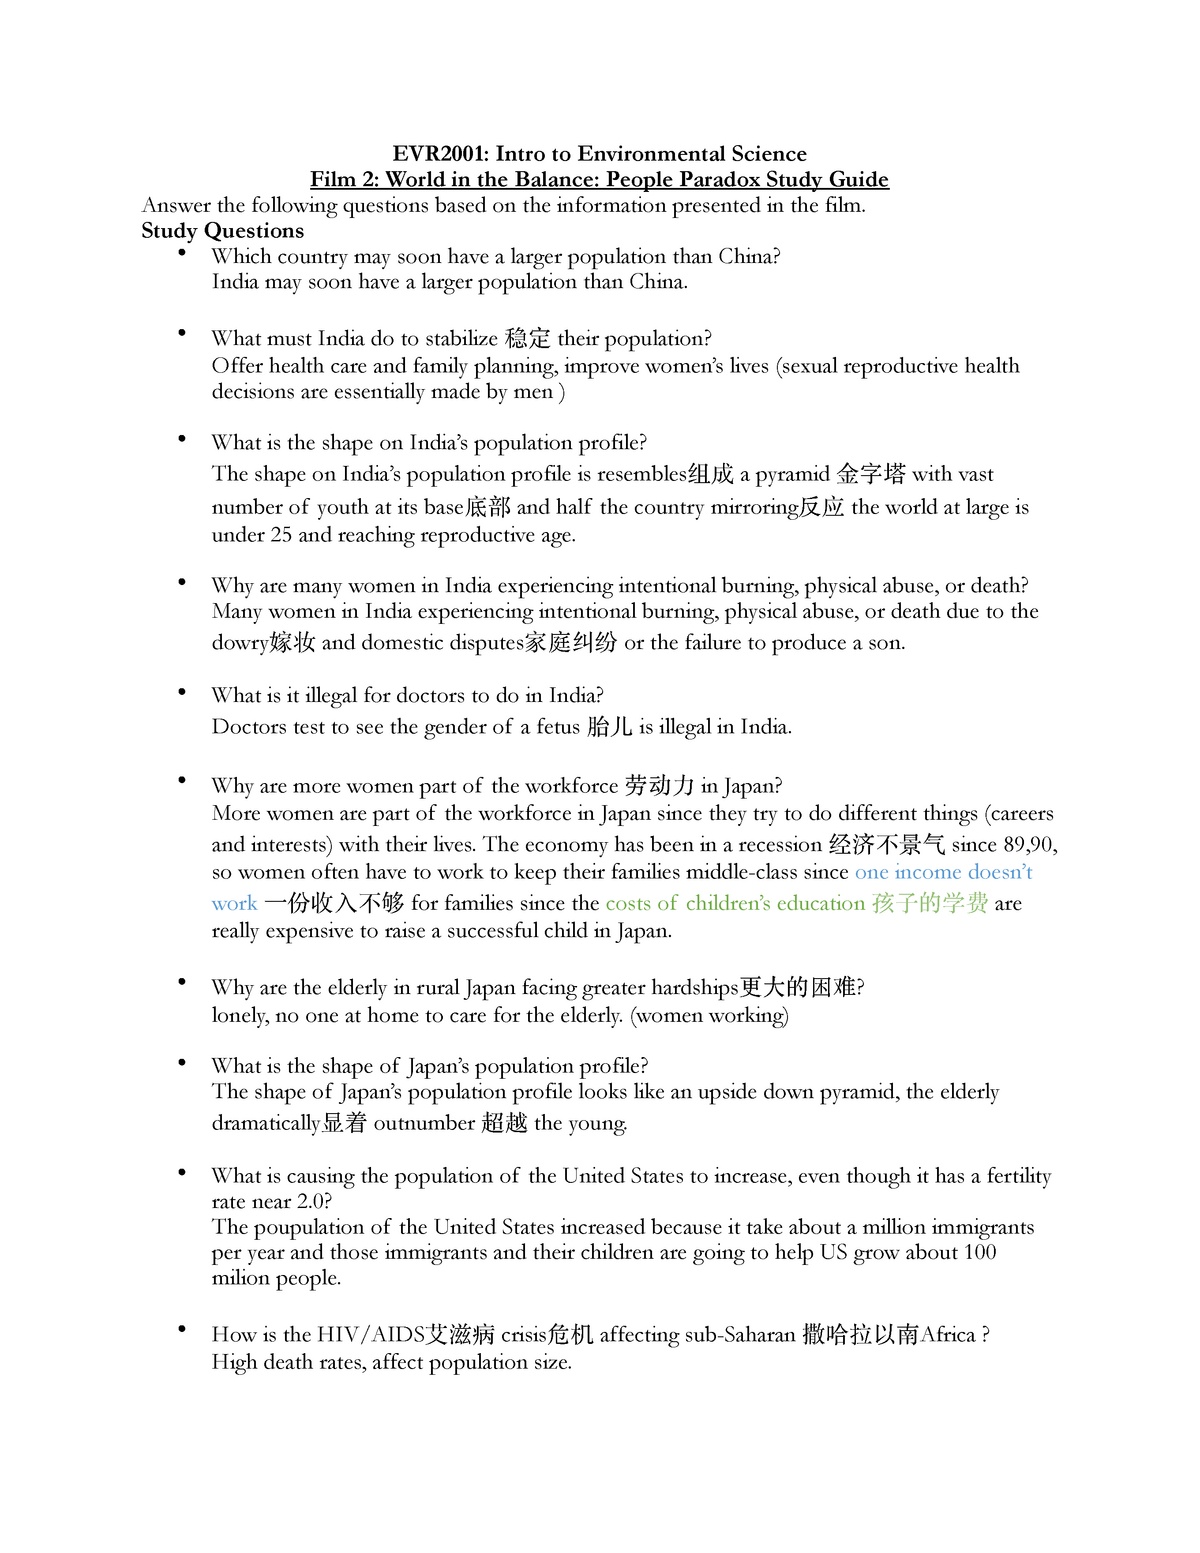 world-in-the-balance-the-population-paradox-worksheet-answers-world-in-balance-worksheet-2